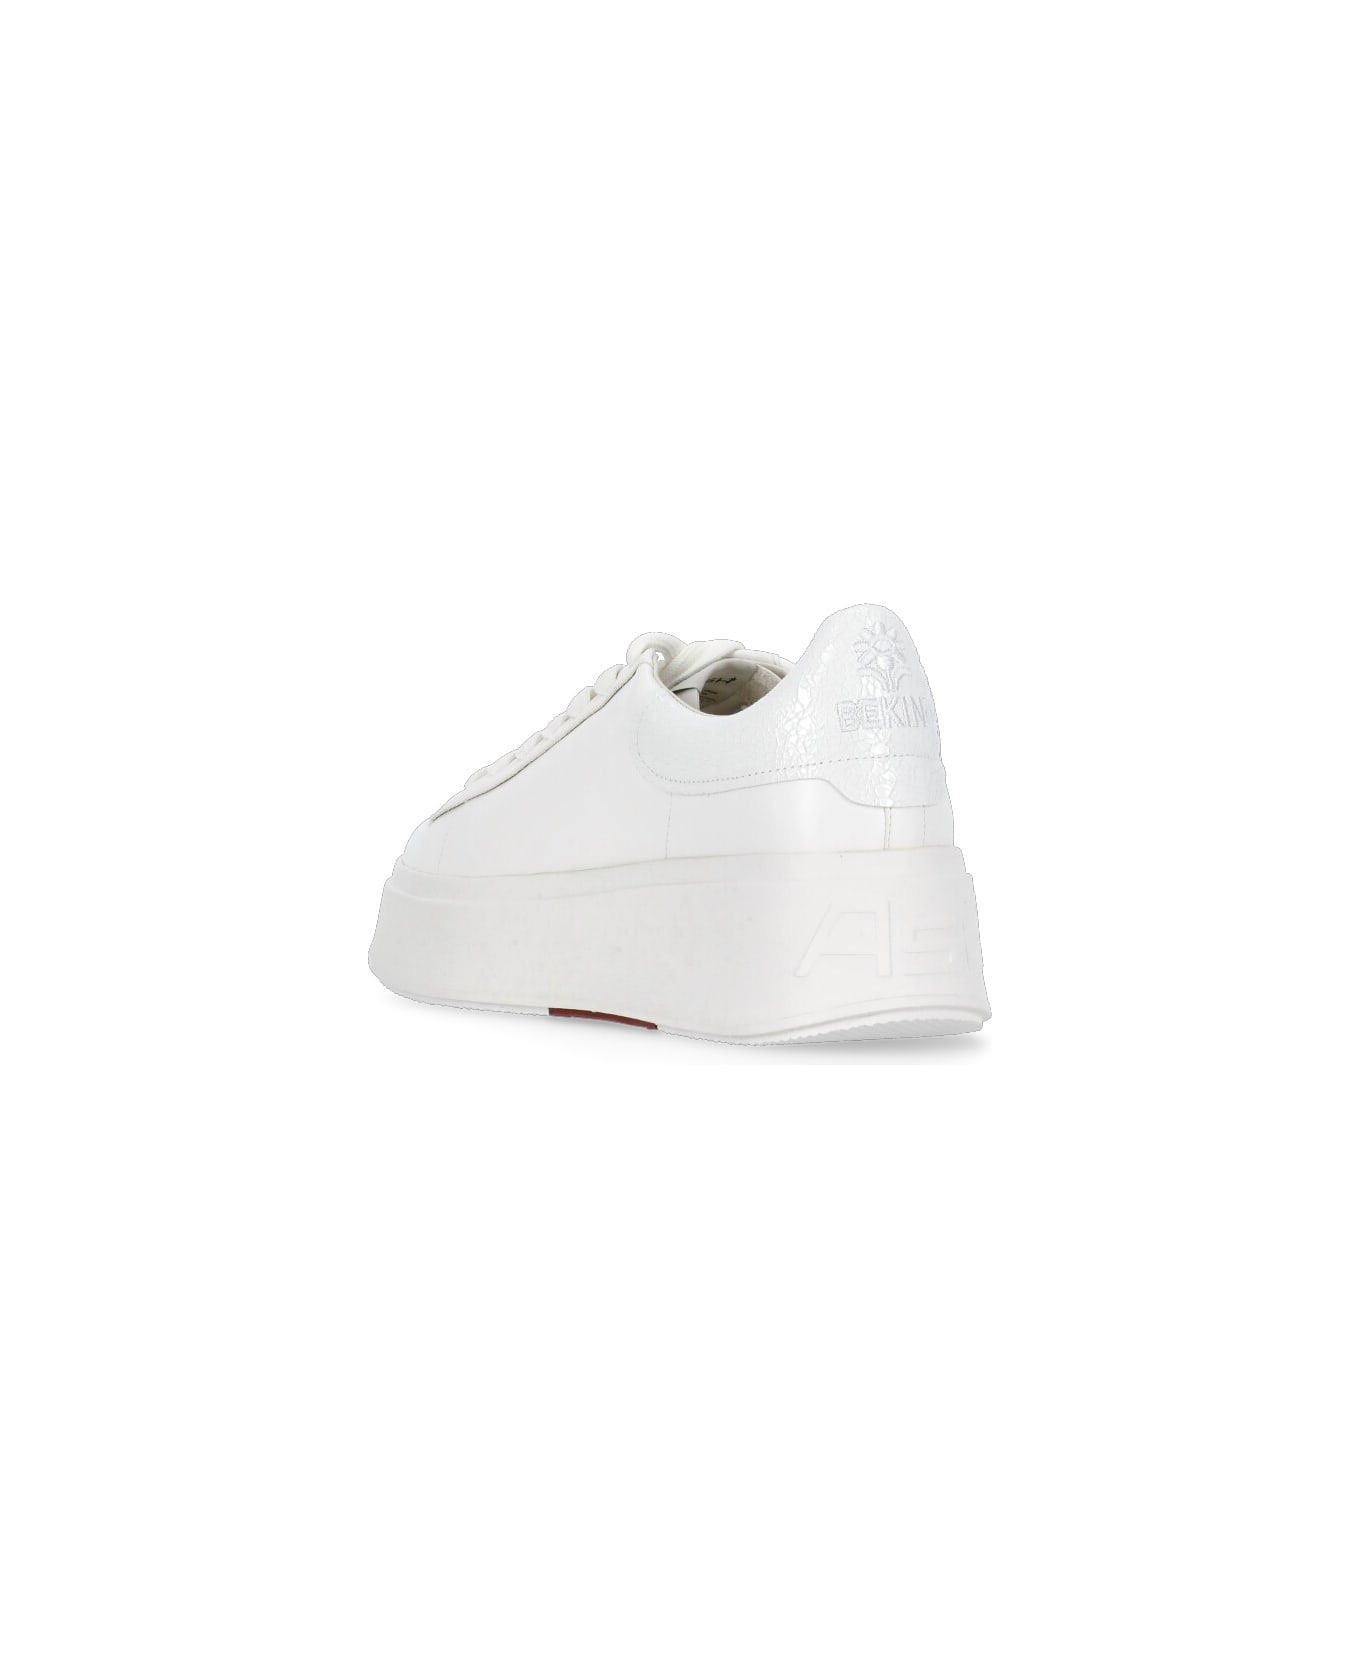 Ash Moby Be Kind Sneakers - White ウェッジシューズ